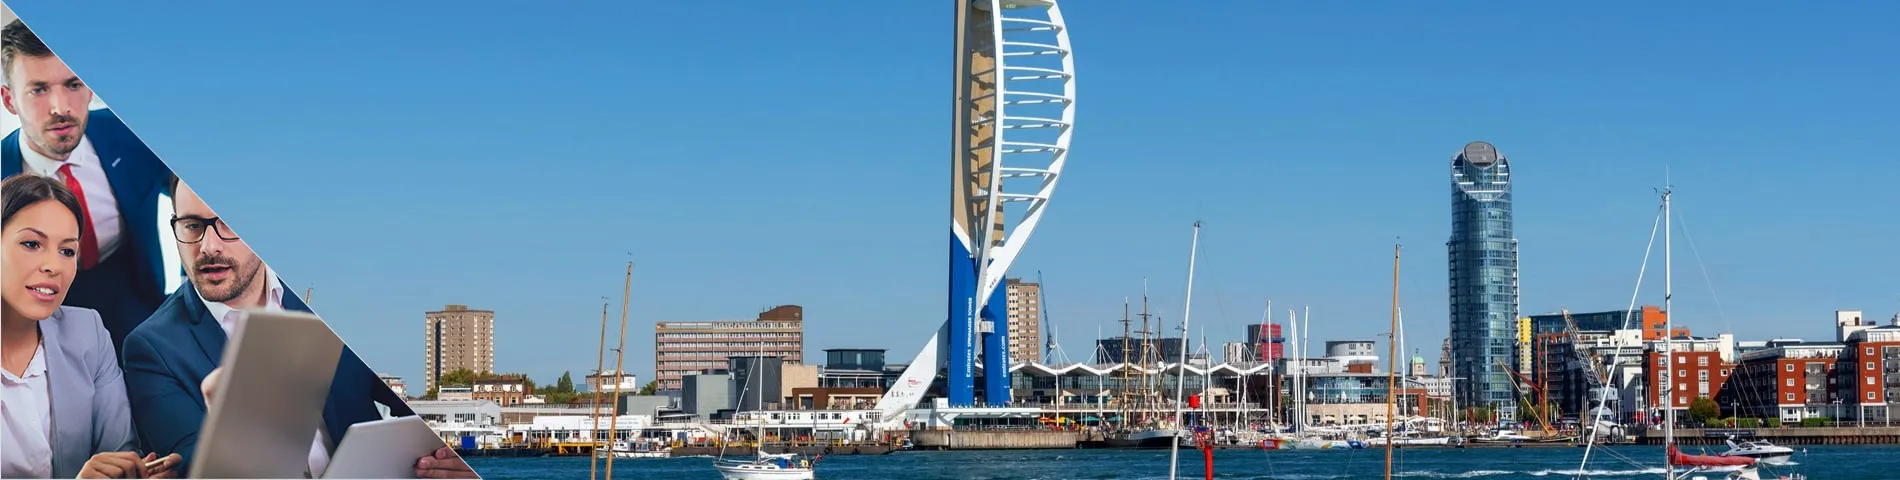 Portsmouth - Yhdistetty perus & business